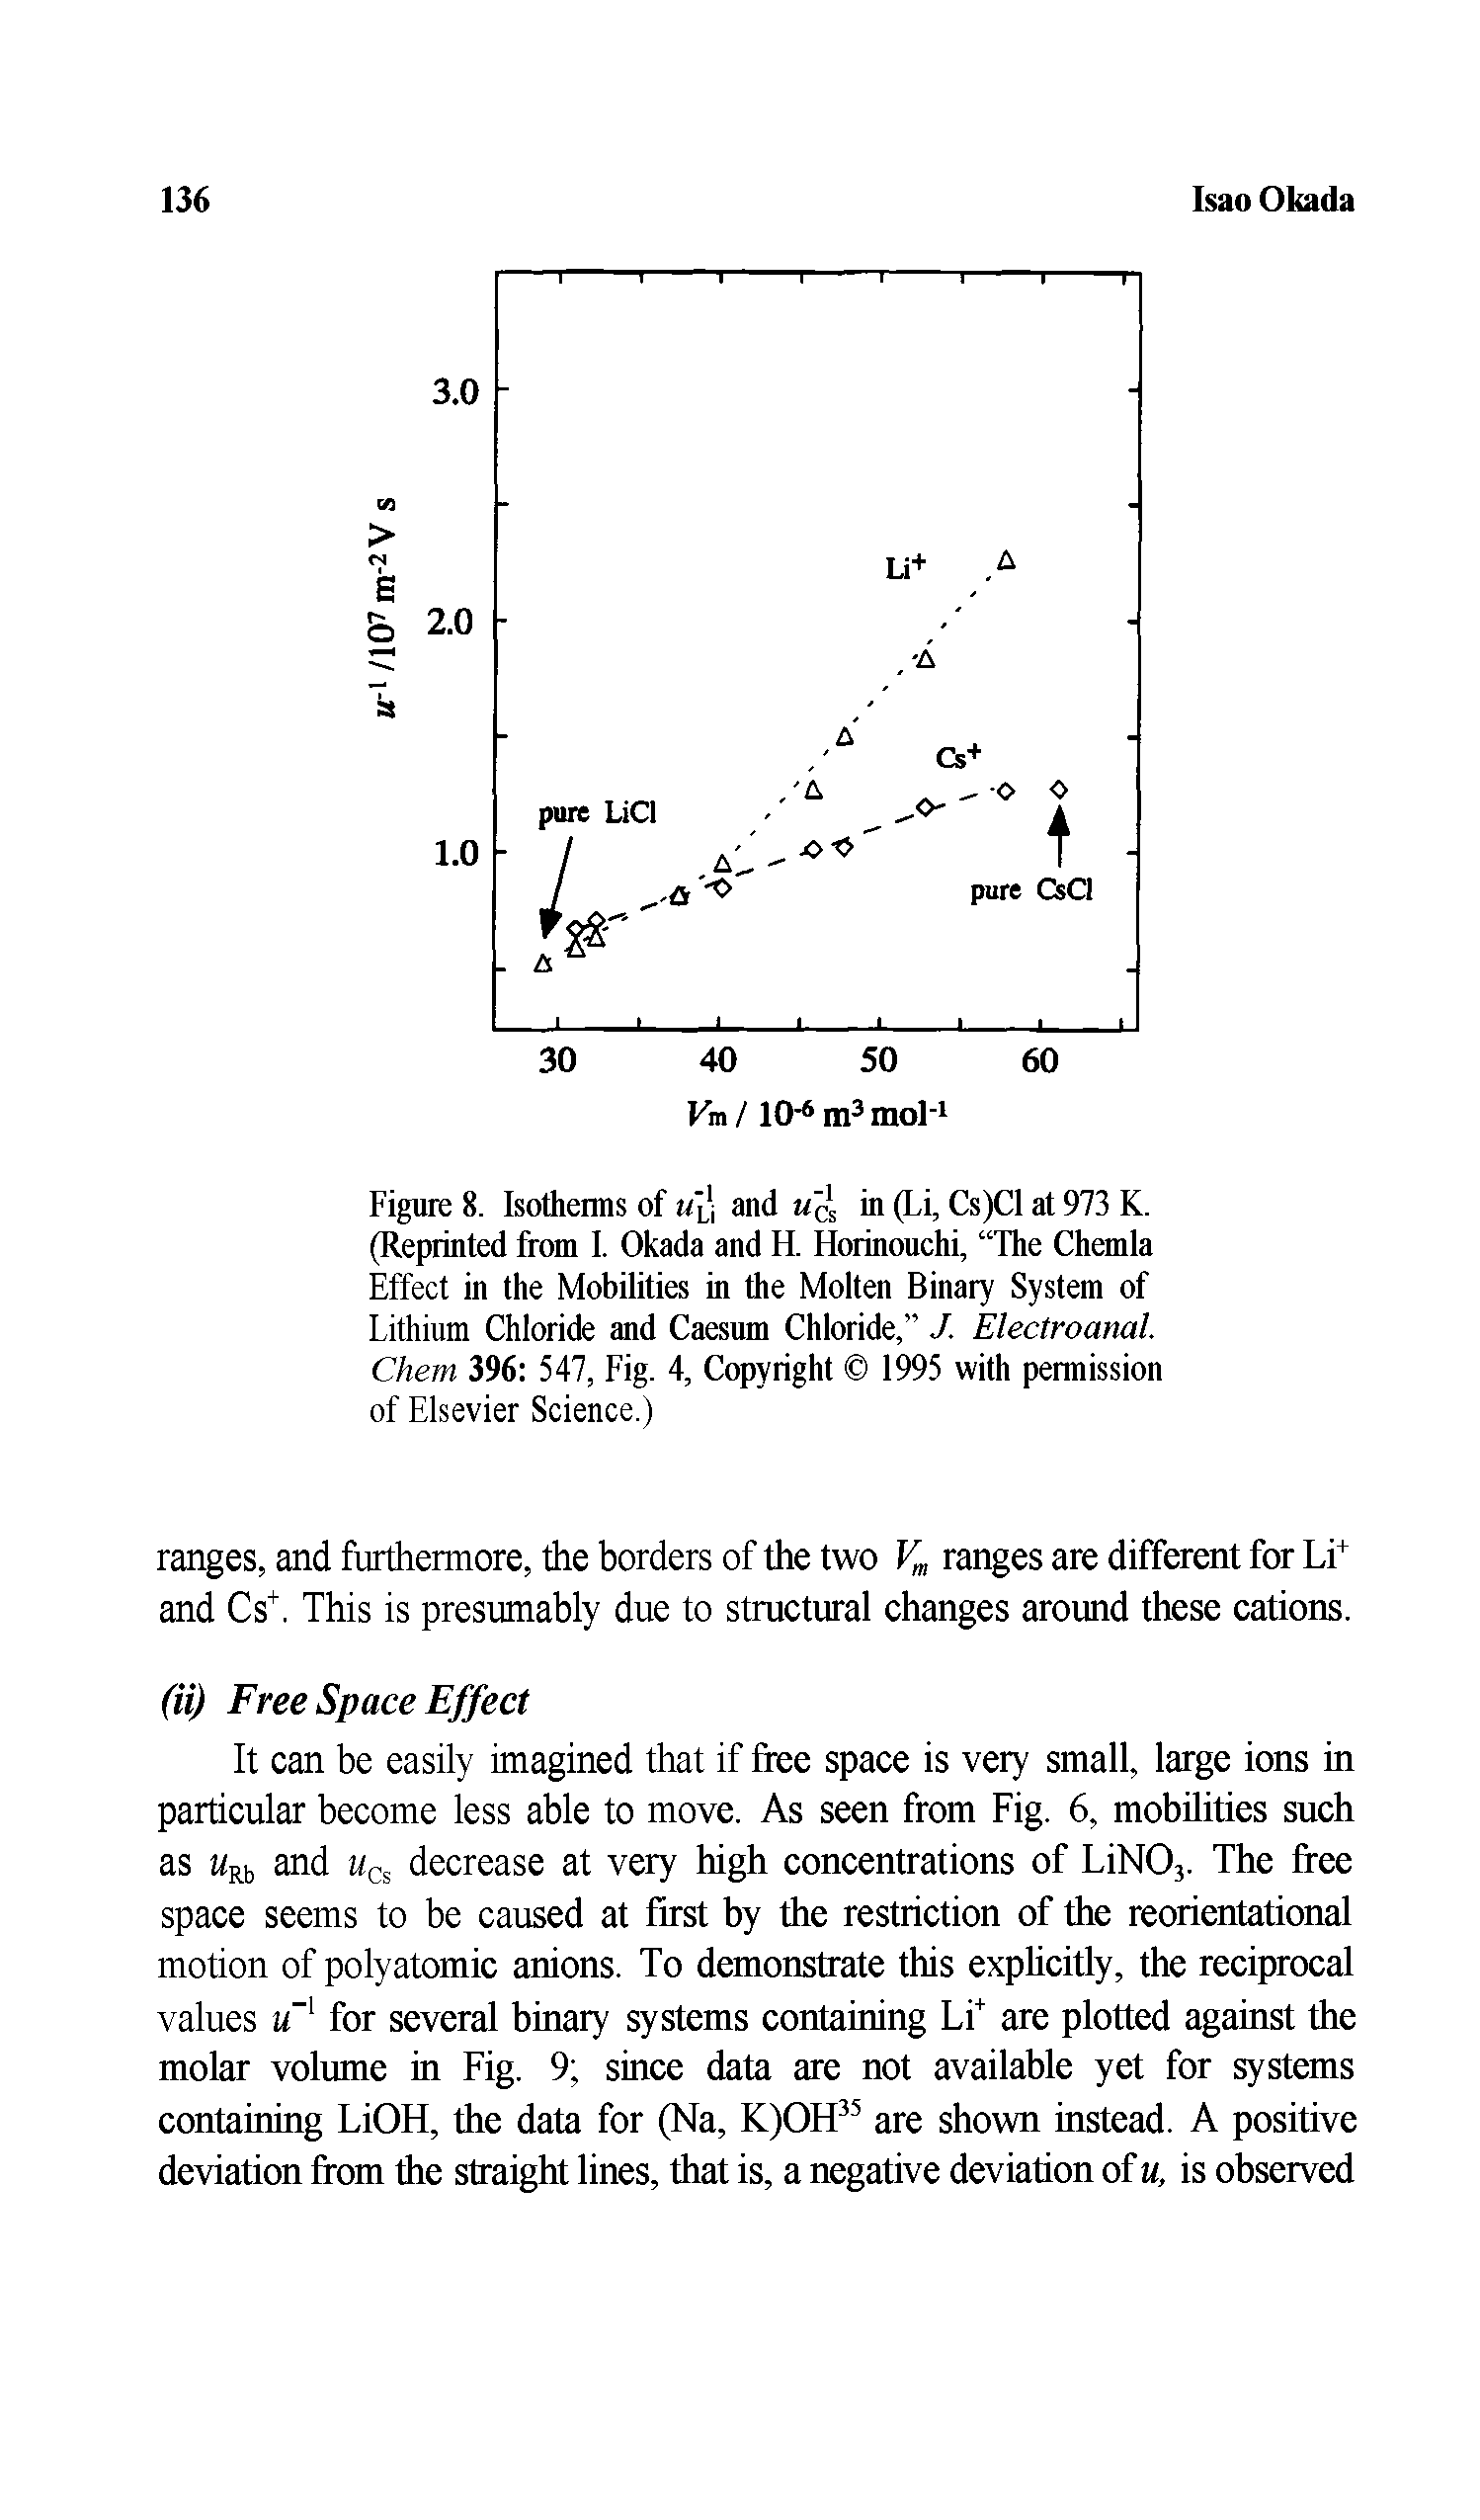 Figure 8. Isotherms of l and Mc in (Li, Cs)Cl at 973 K. (Reprinted from I. Okada and H. Horinouchi, The Chemla Effect in the Mobilities in the Molten Binary System of Lithium Chloride and Caesum Chloride, J. Electroanal. Chem 396 547, Fig. 4, Copyright 1995 with permission of Elsevier Science.)...